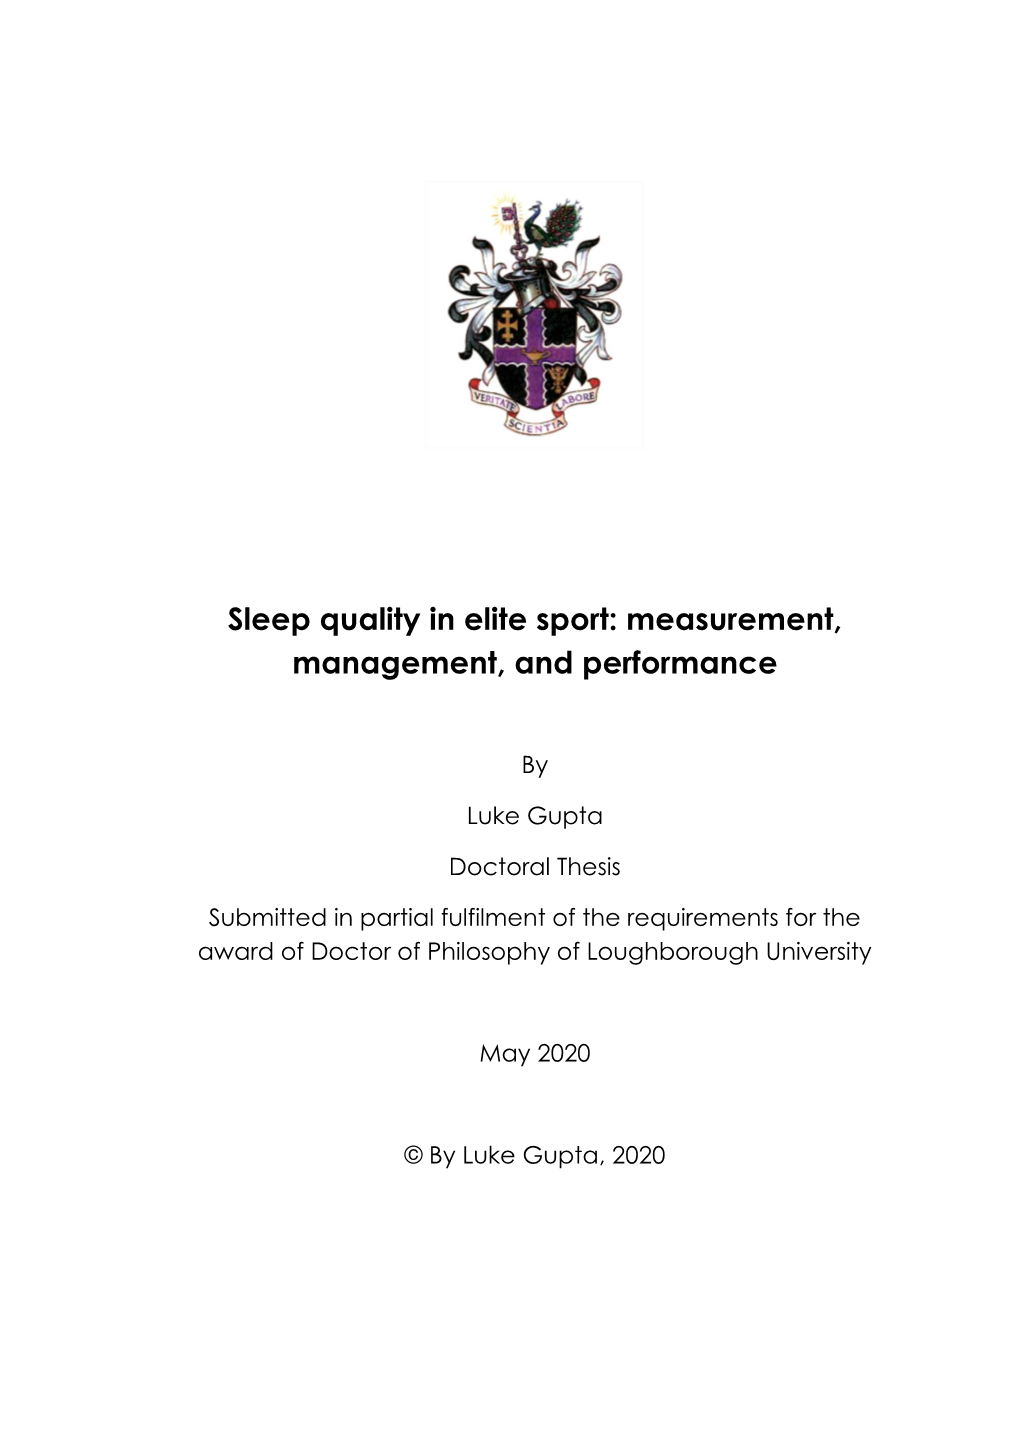 Sleep Quality in Elite Sport: Measurement, Management, and Performance